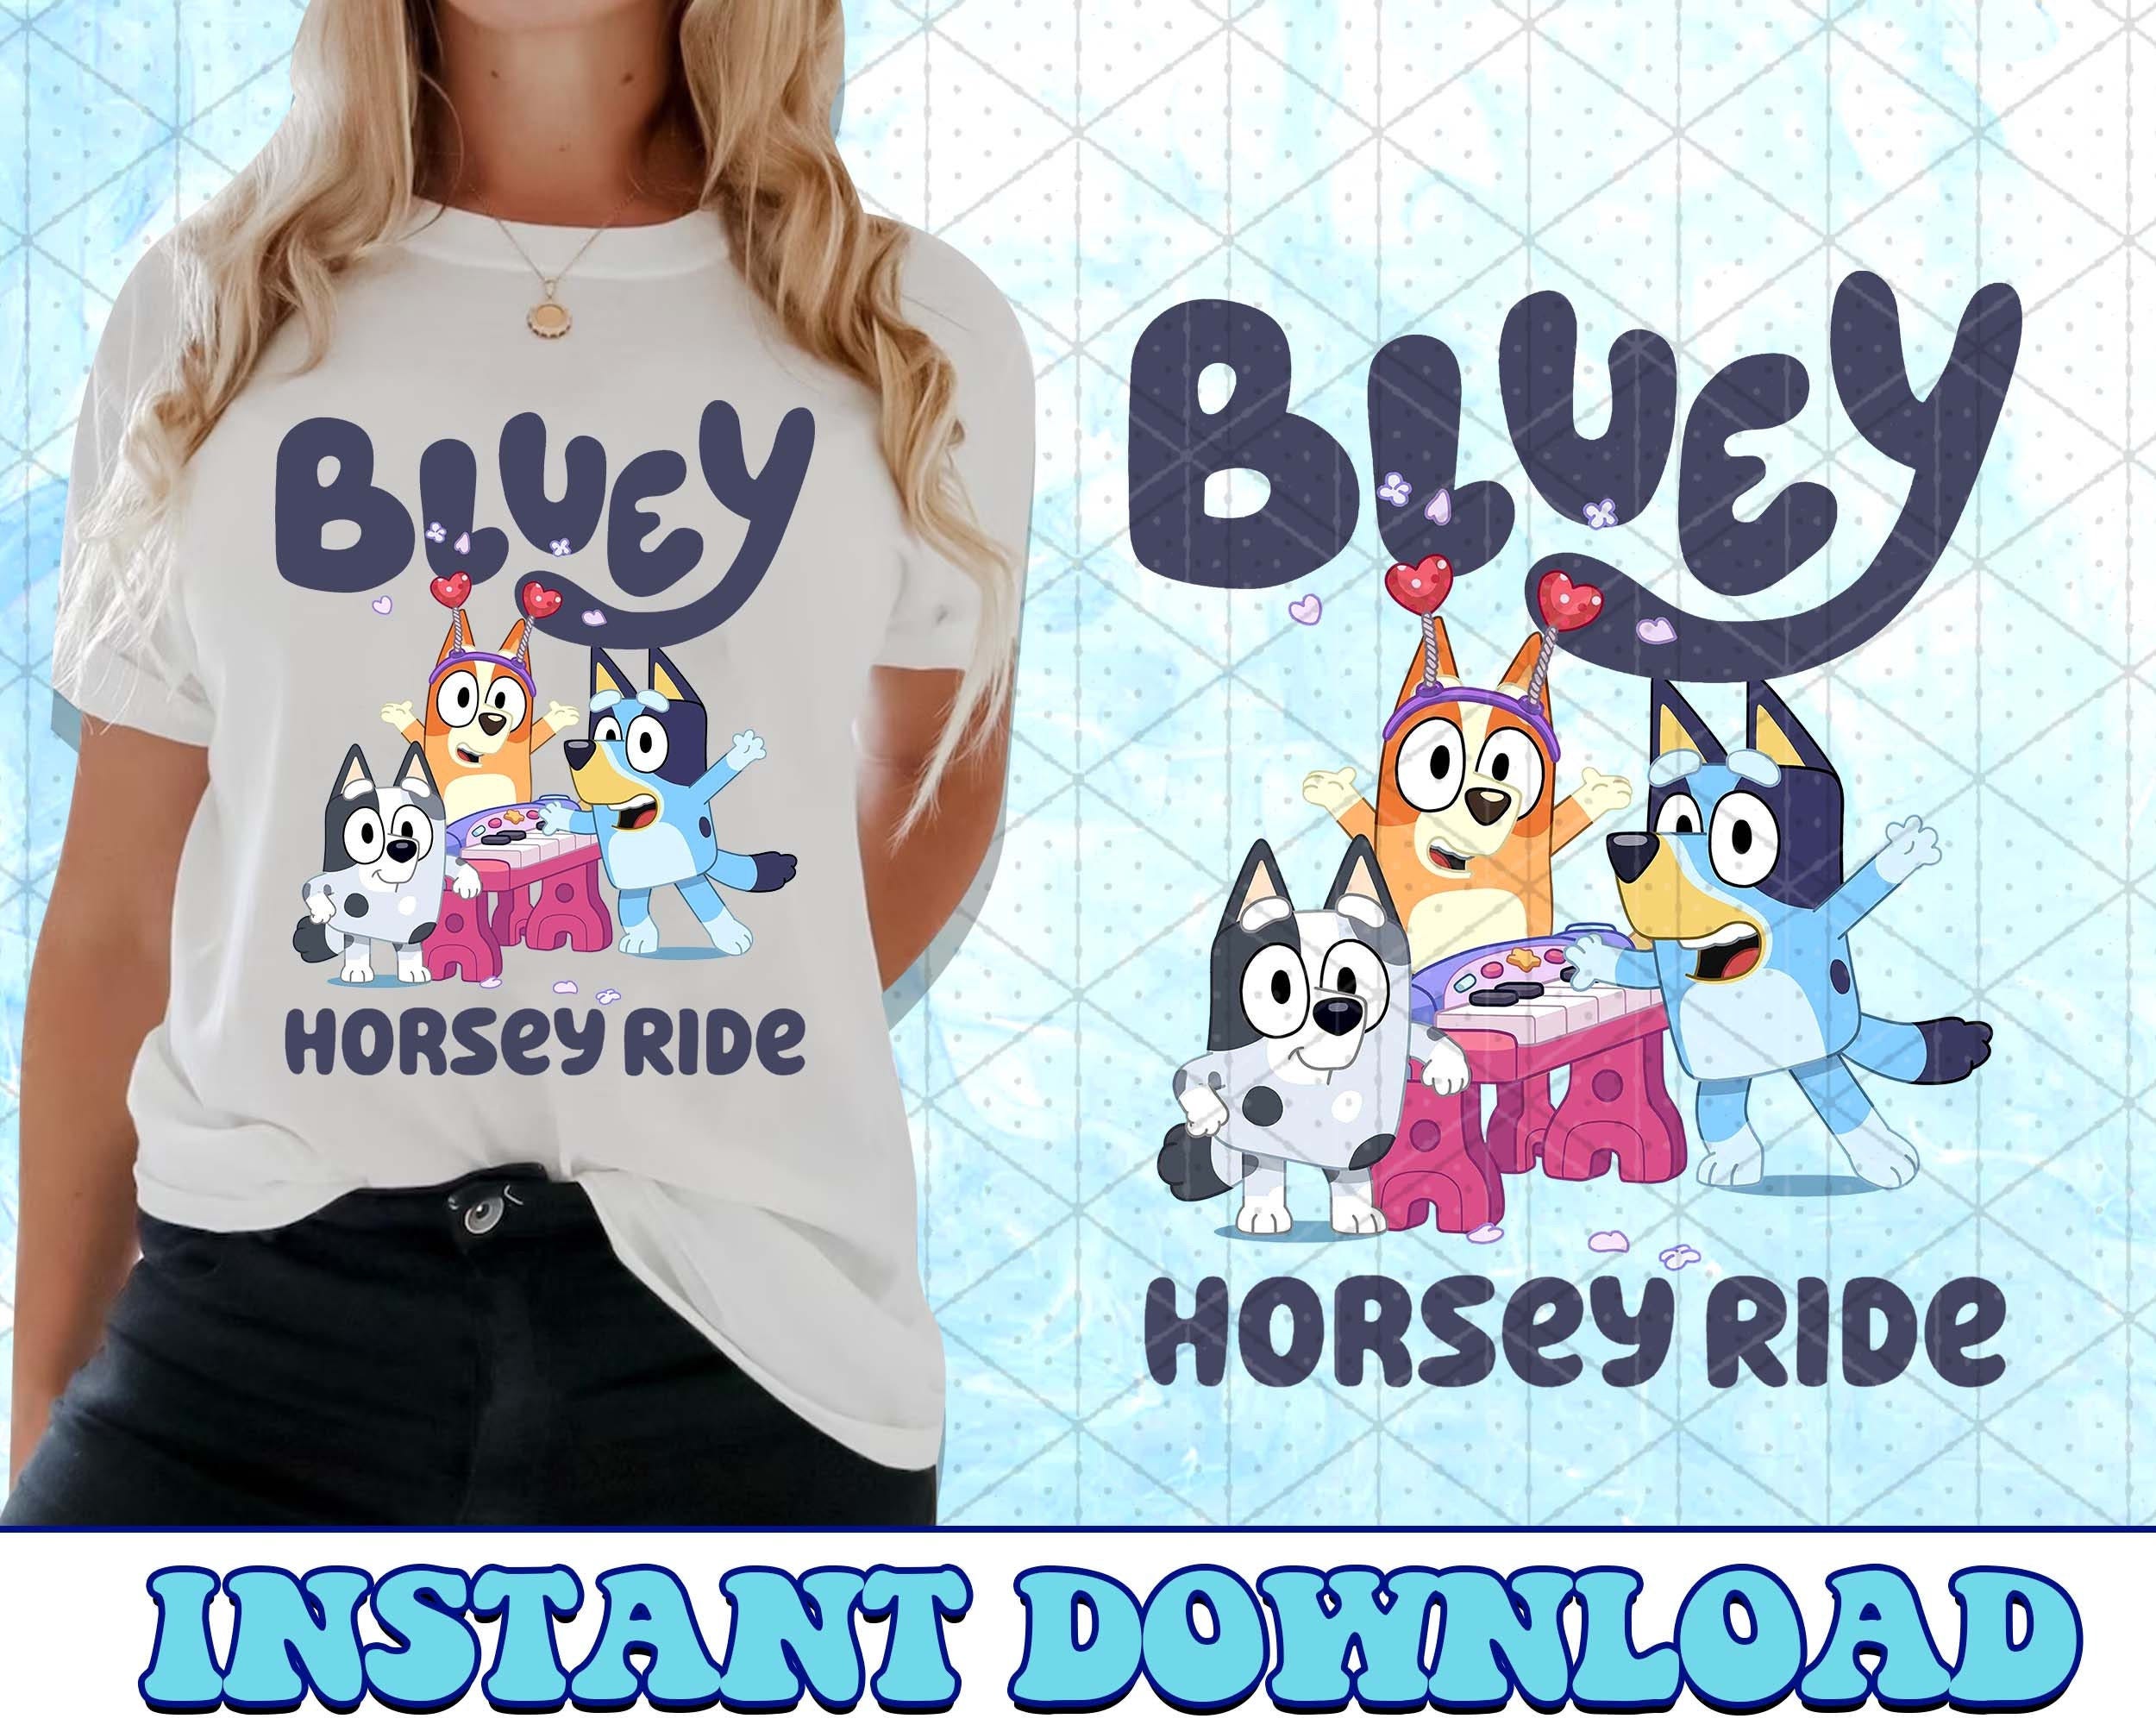 Bluey Horsey Ride PNG, Bluey Family PNG, Bluey Png, Bluey Bingo Png, Bluey Mom Png, Bluey Dad Png, Bluey Friends Png, Bluey PNG